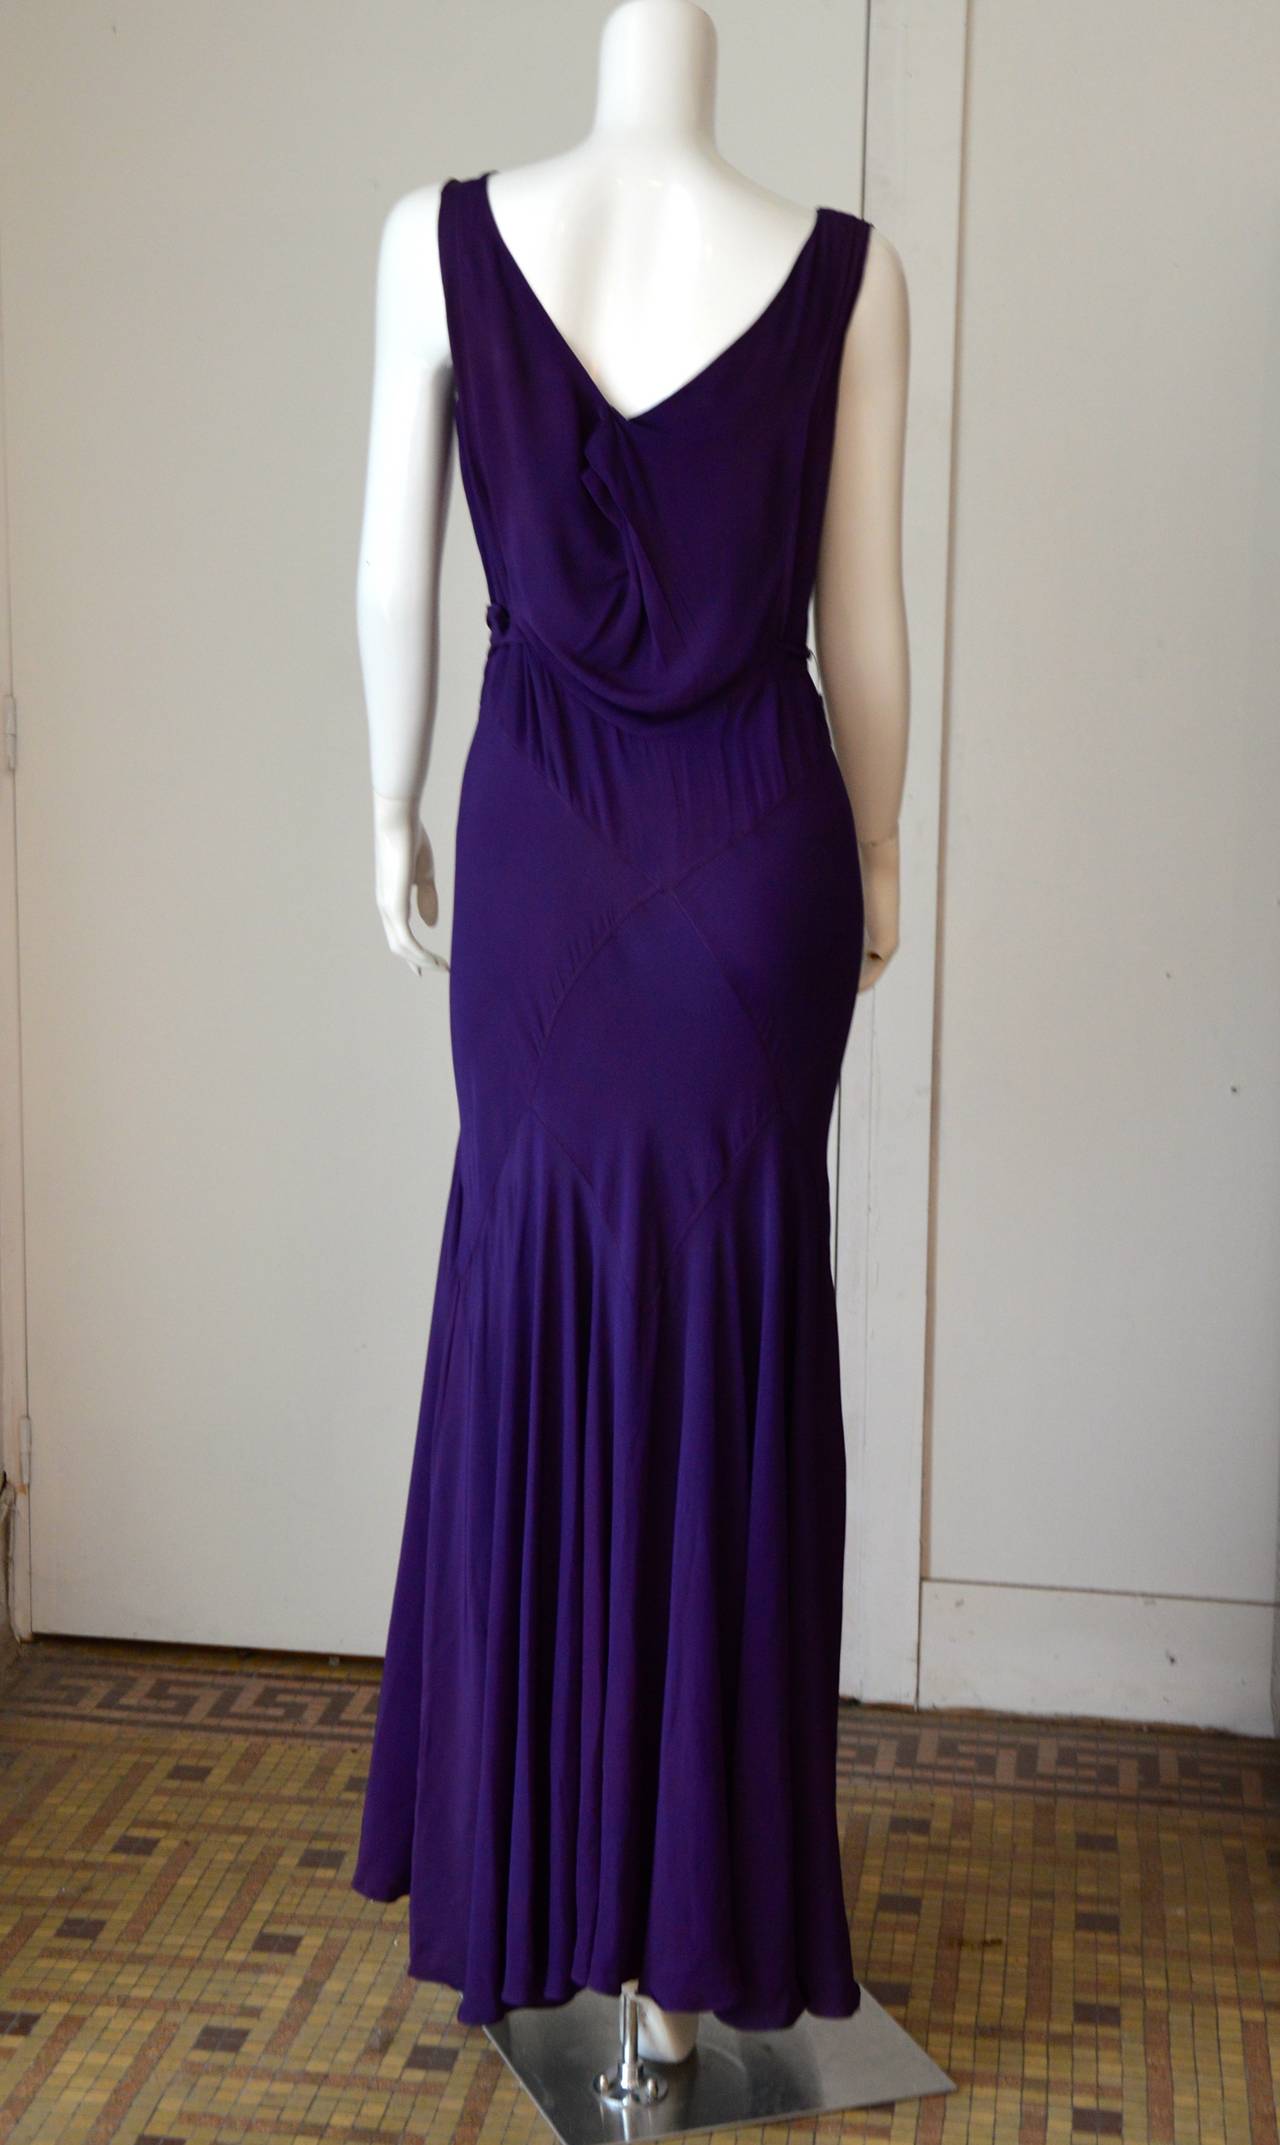 Elegant Purple biais cut 1930 cocktail dress.
very faint small stain to front and back of bodice but barely noticeable, 
small L-shaped darn to rear centre back hem